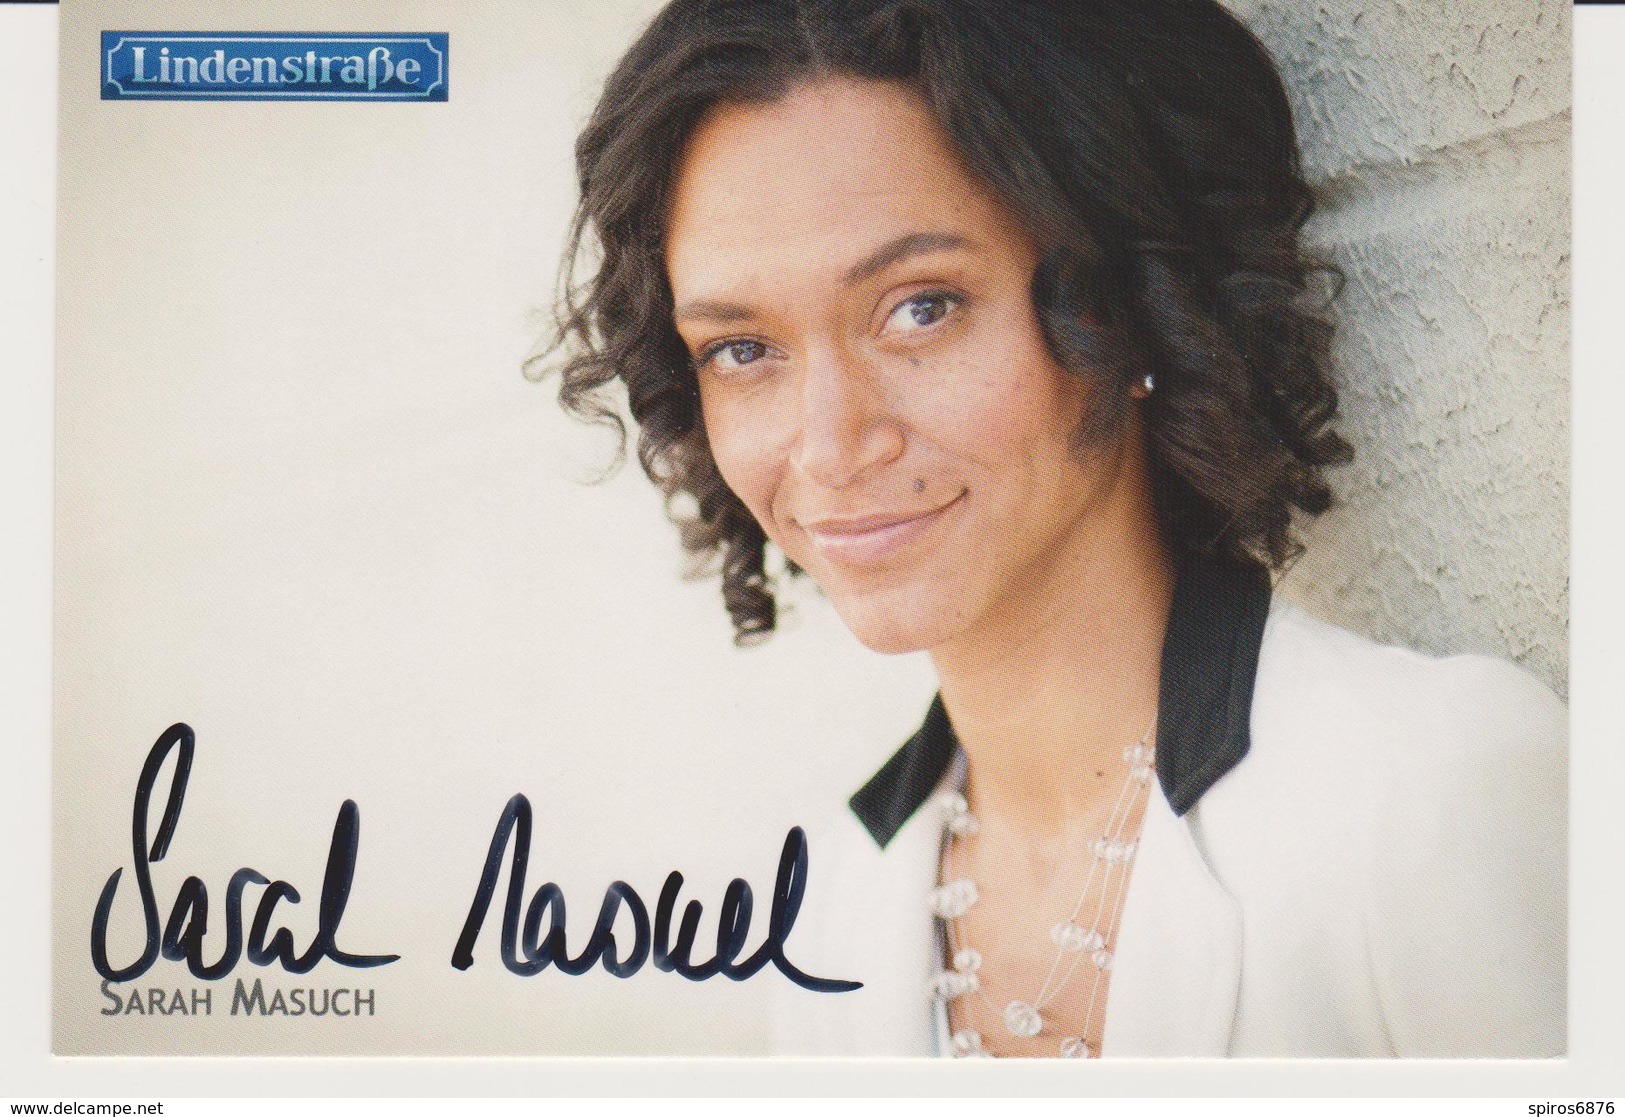 Authentic Signed Card / Autograph -  Actress SARAH MASUCH - German TV Series Lindenstrasse - Autographs